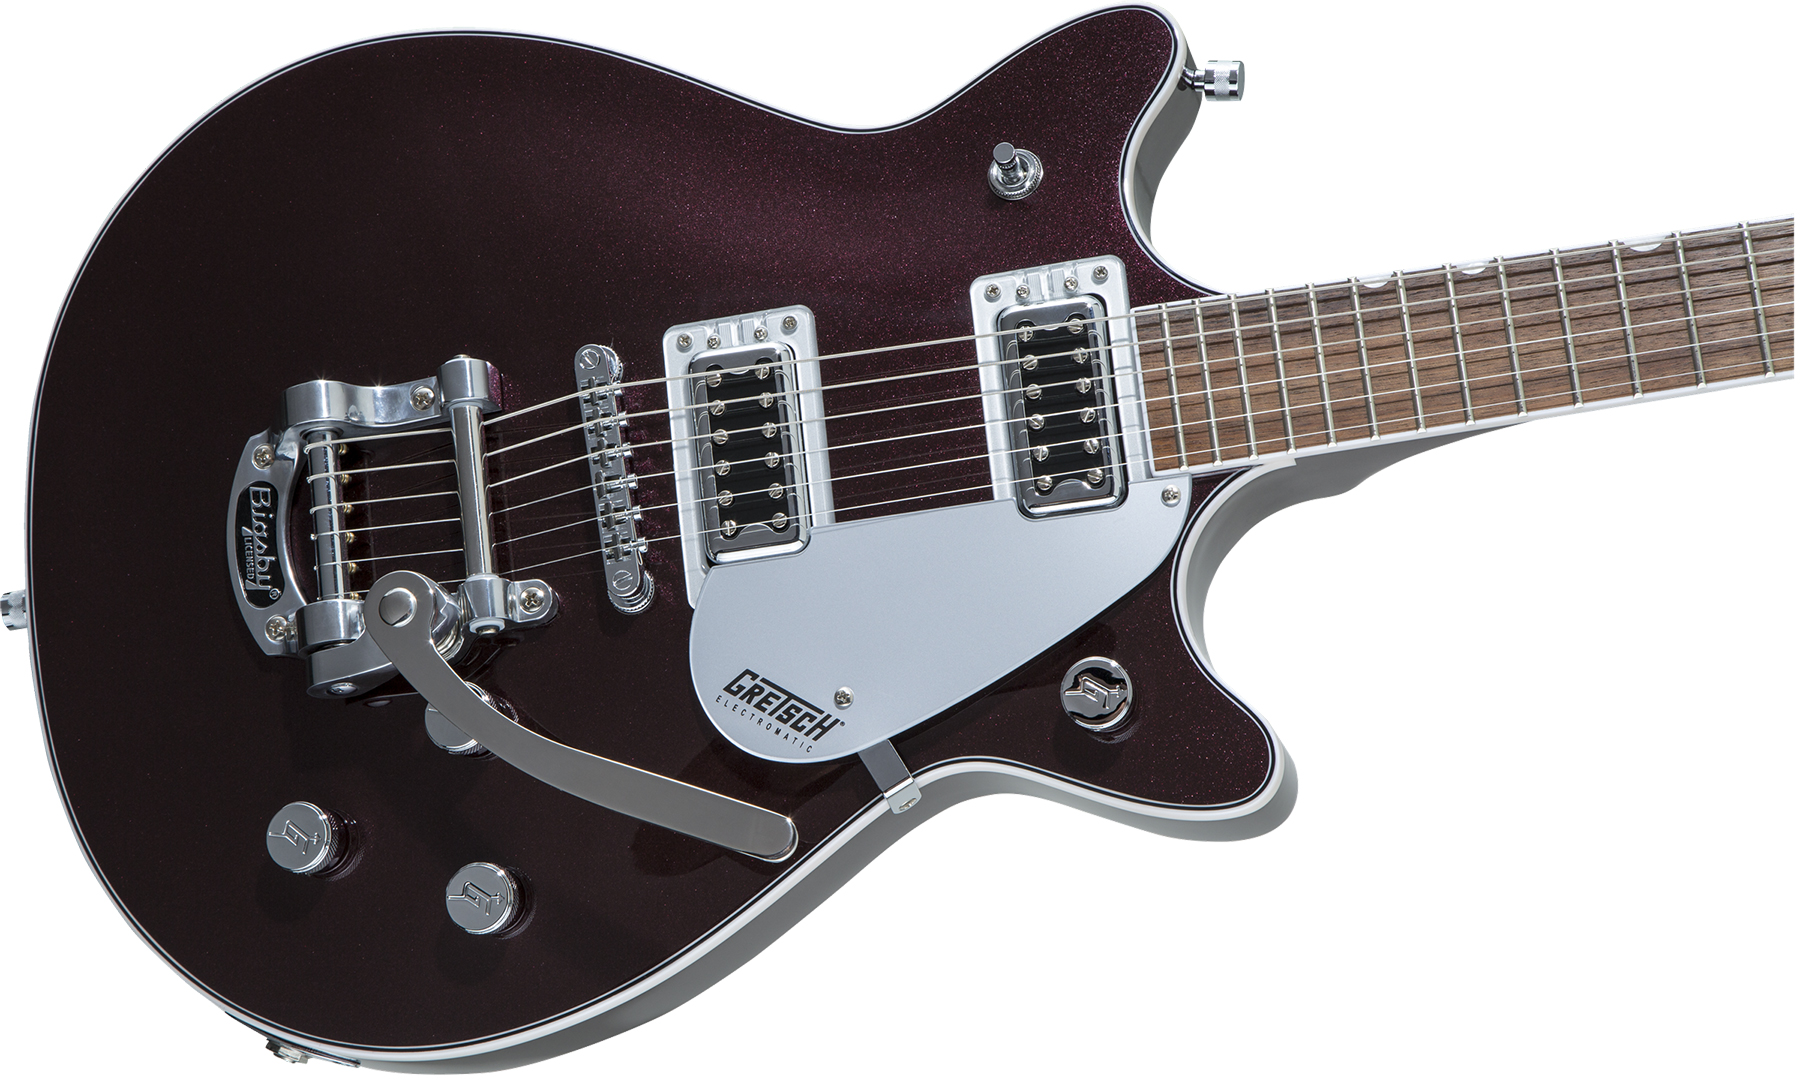 Gretsch G5232t Electromatic Double Jet Ft 2019 Hh Bigsby Lau - Dark Cherry Metallic - Double cut electric guitar - Variation 2